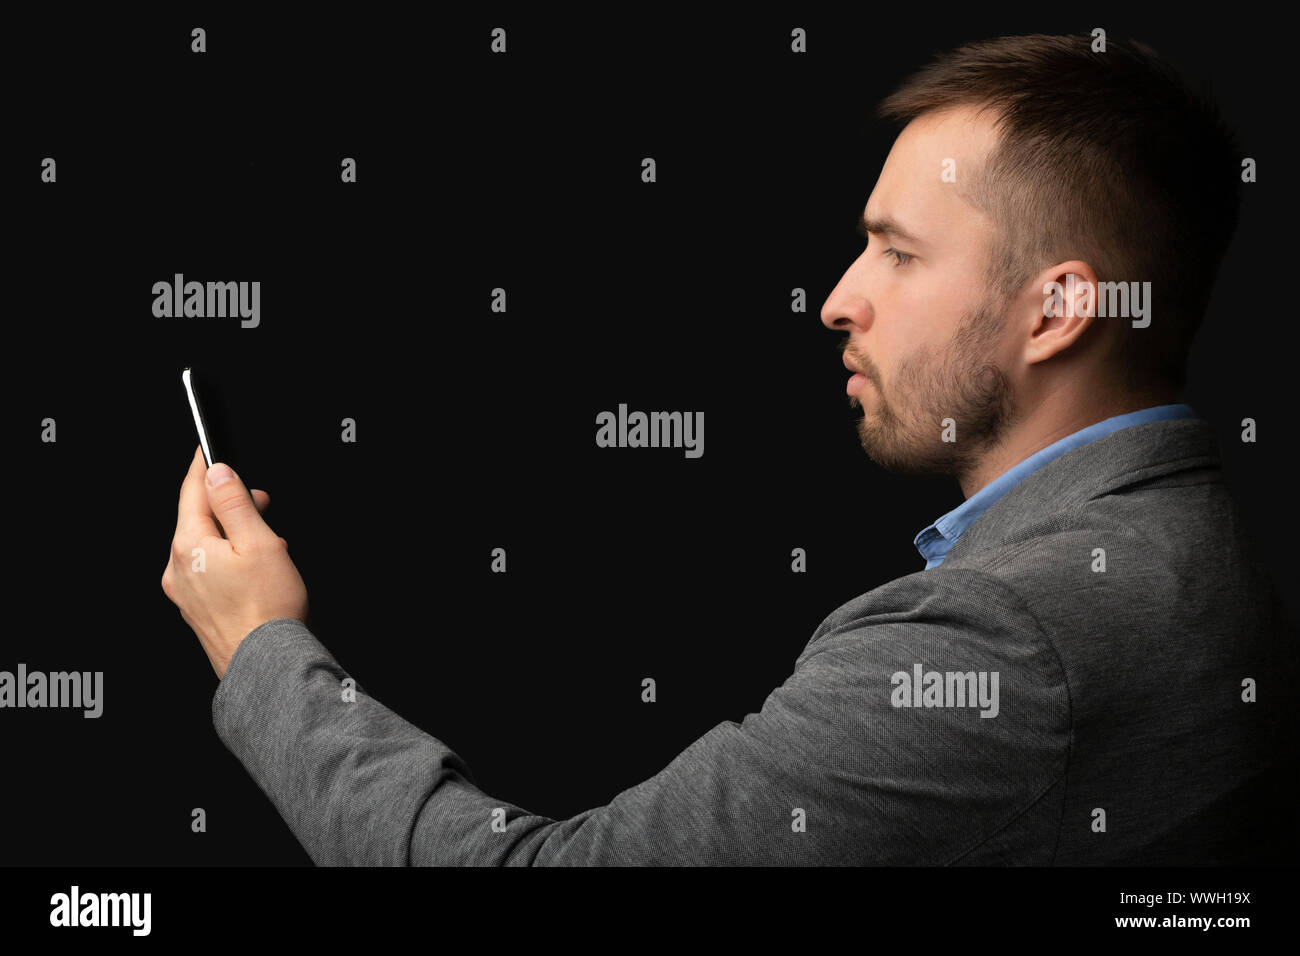 Modern businessman using facial recognition softwear on cellphone Stock Photo